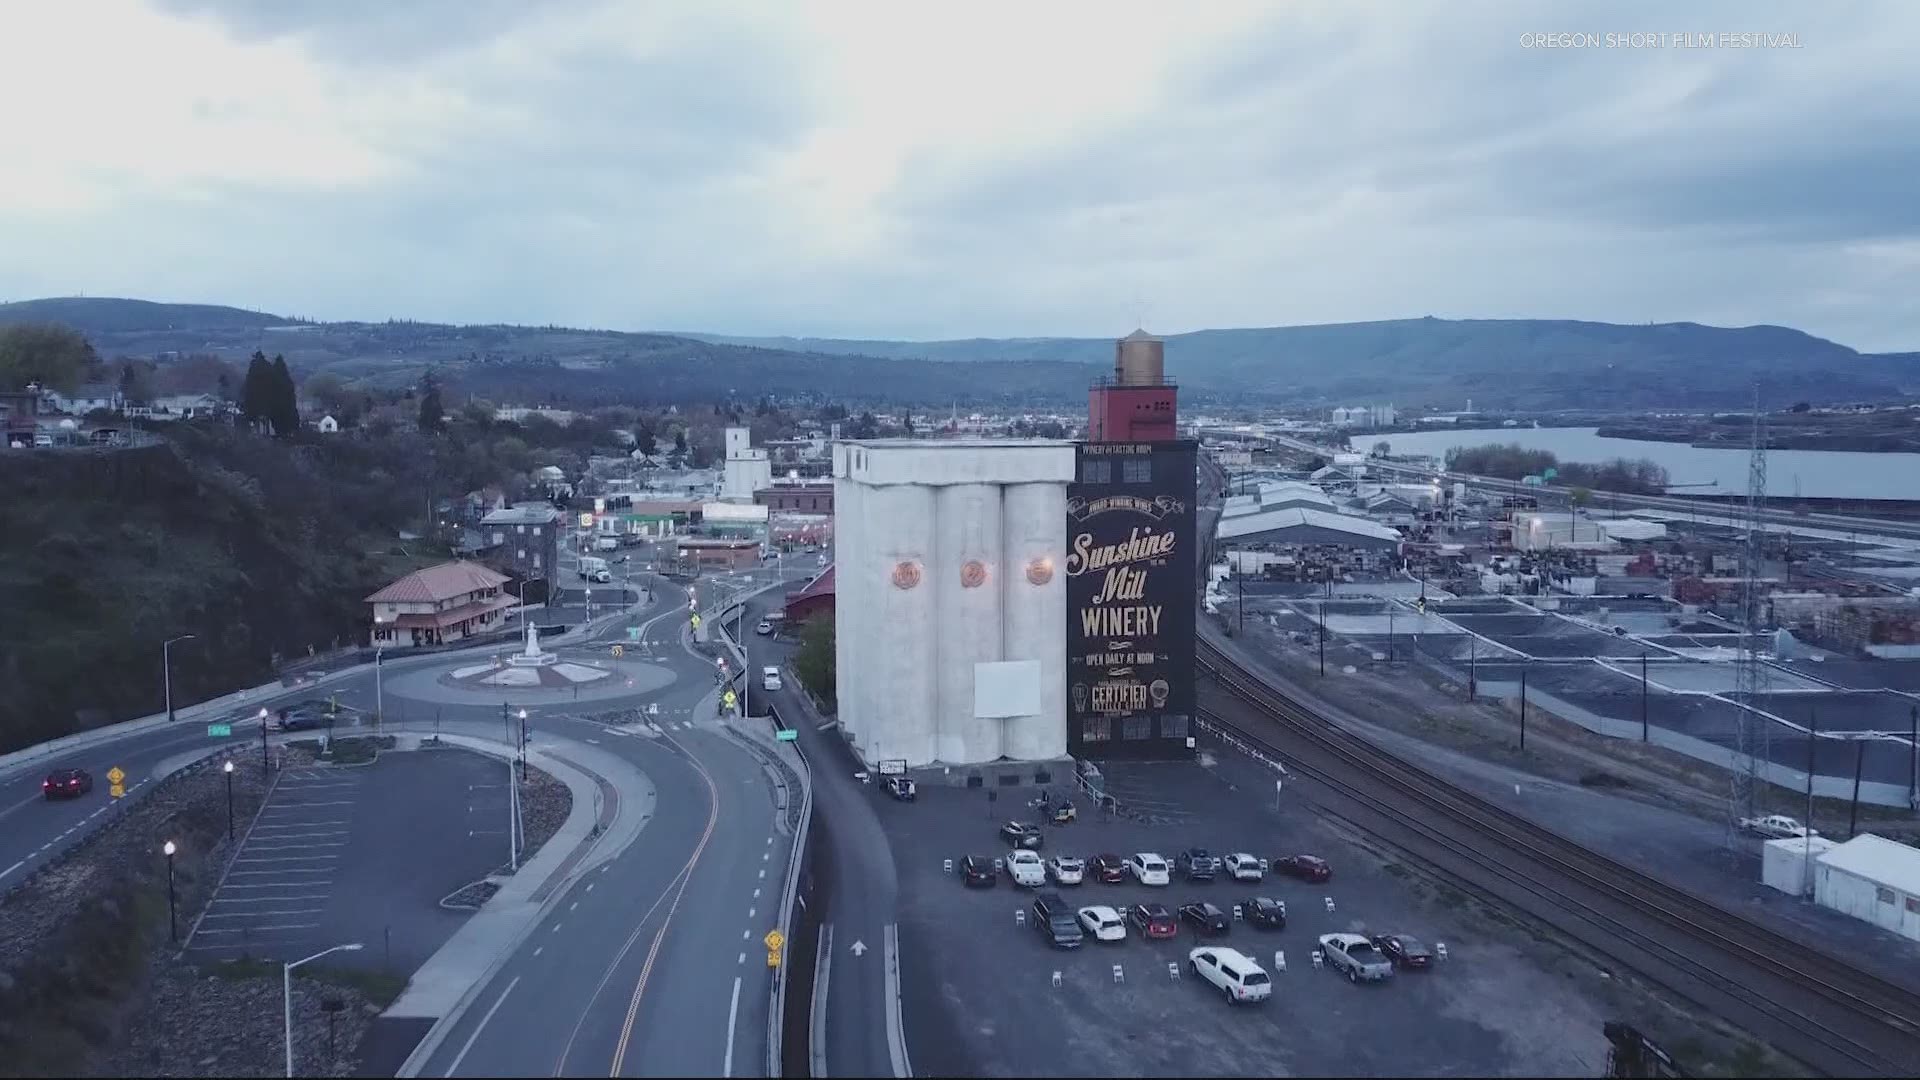 Looking for something to do this weekend? Why not head to the gorge for the Oregon Short Film Festival. Jon Goodwin gives us a preview.